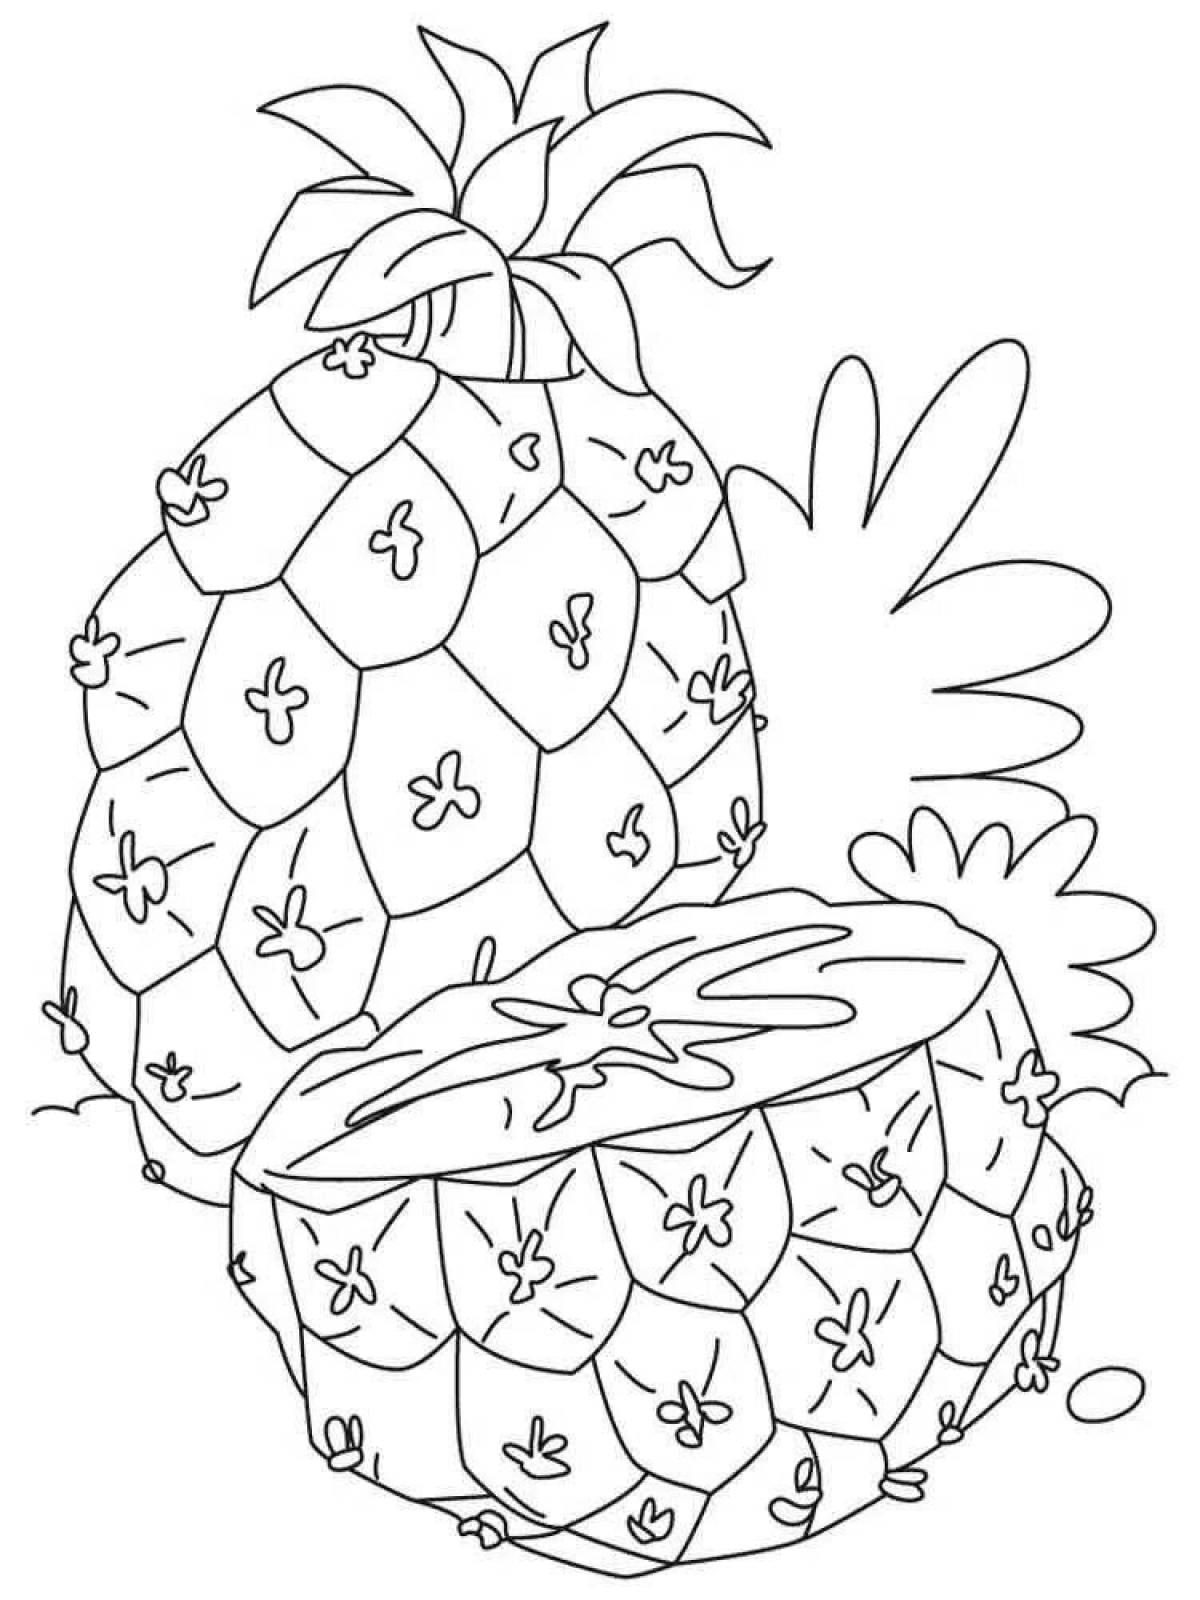 A fun pineapple coloring book for kids